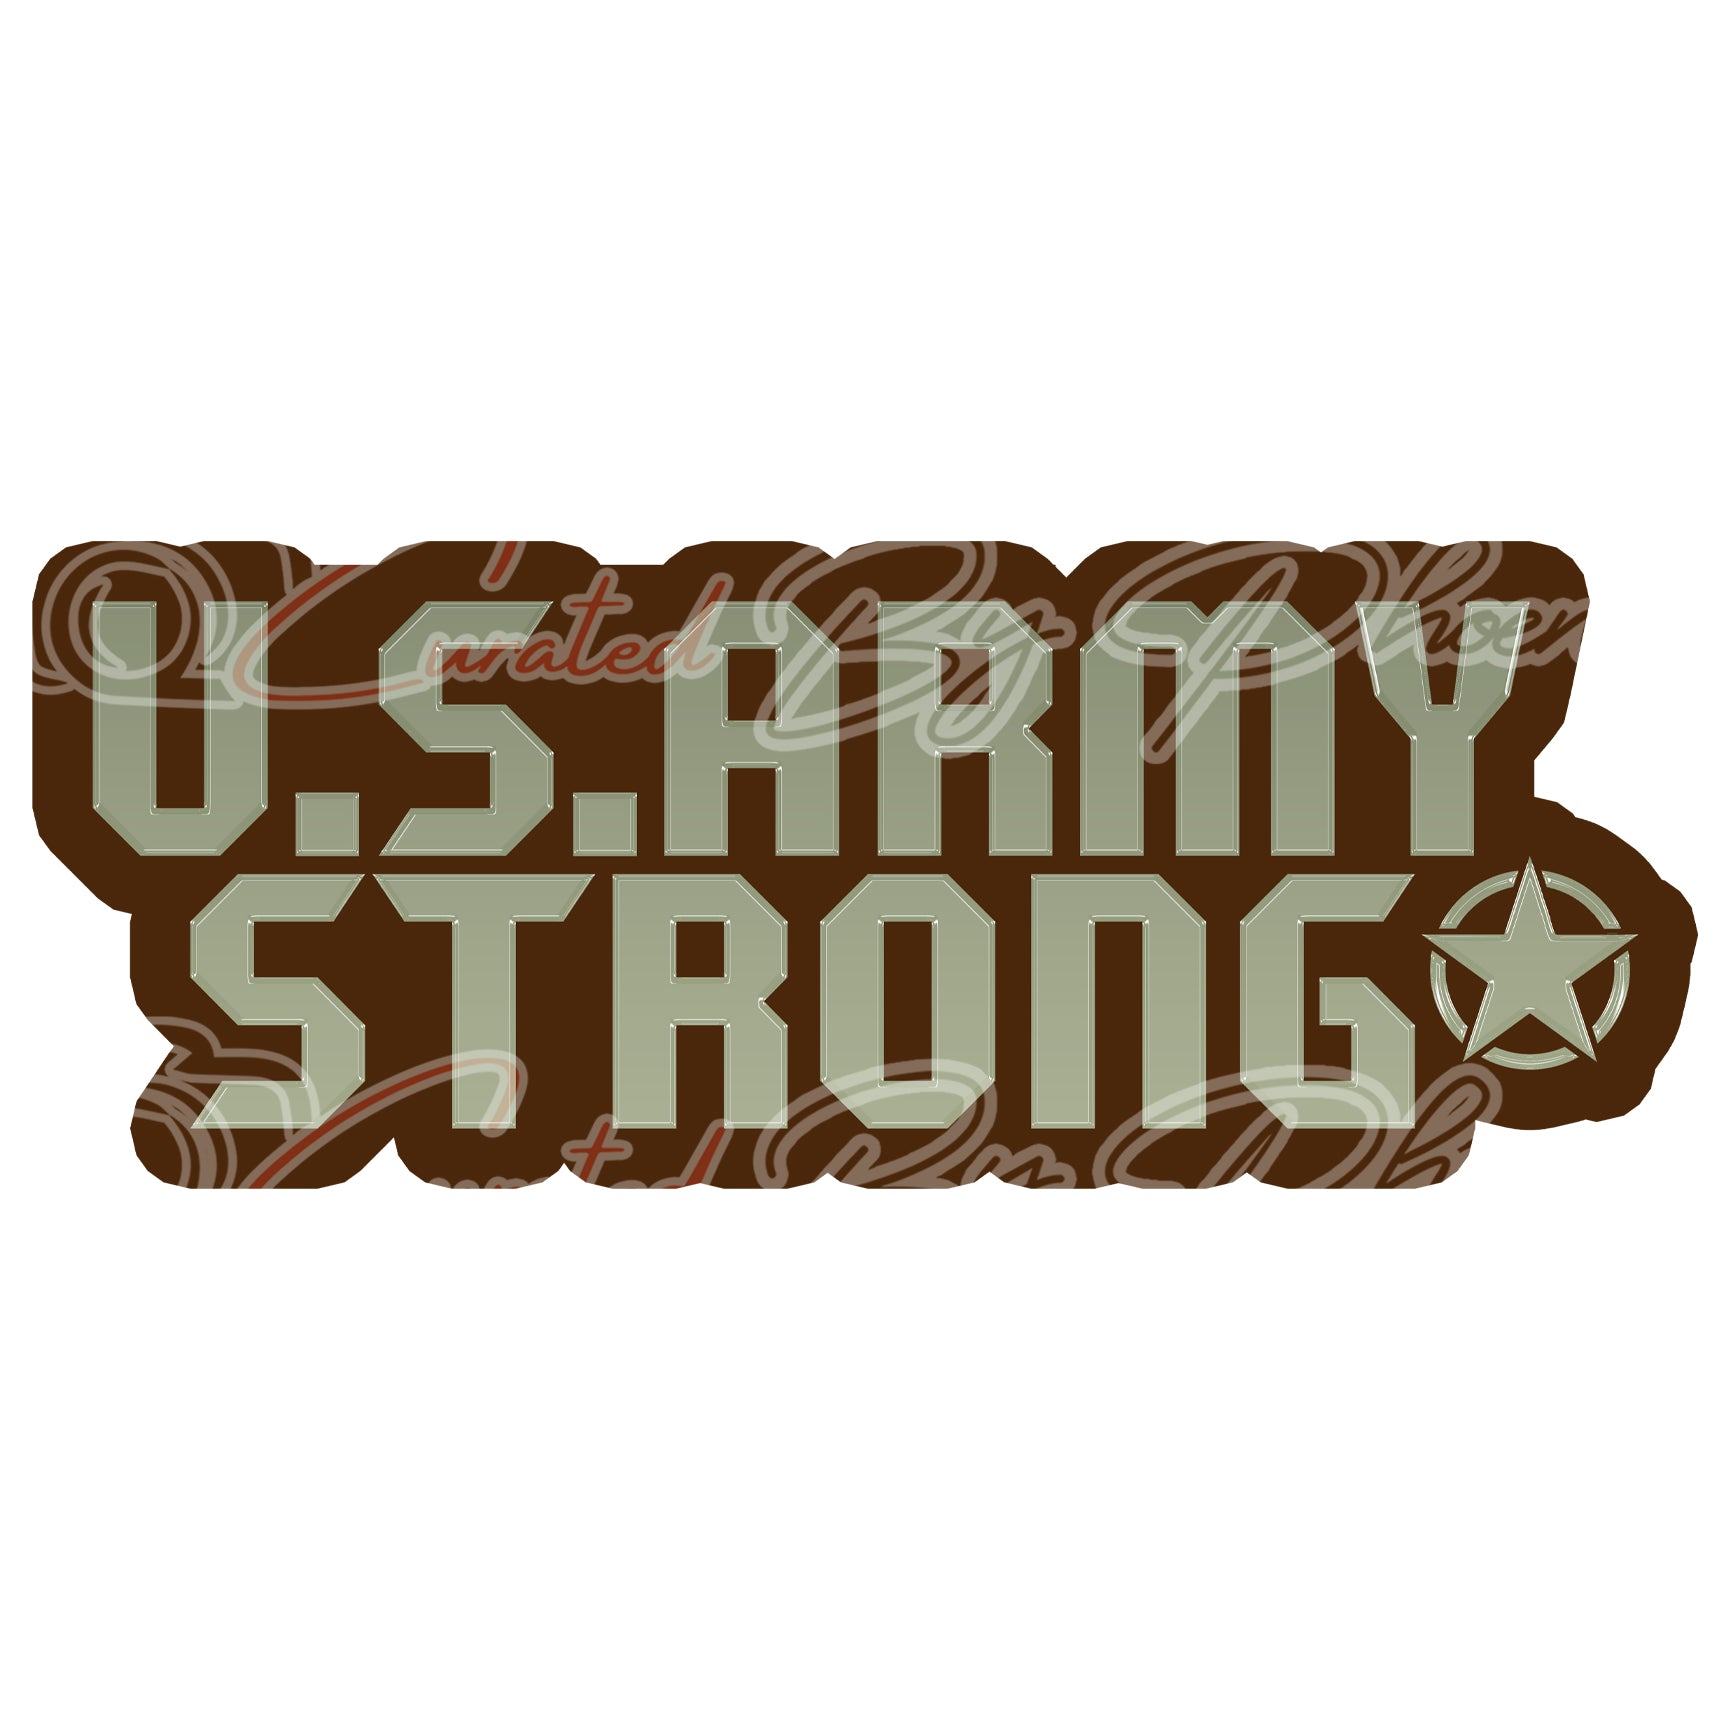 U S Army Strong  prop-military photo booth props- military props-photo booth props-custom props-prop signs-props -Curated by Phoenix 